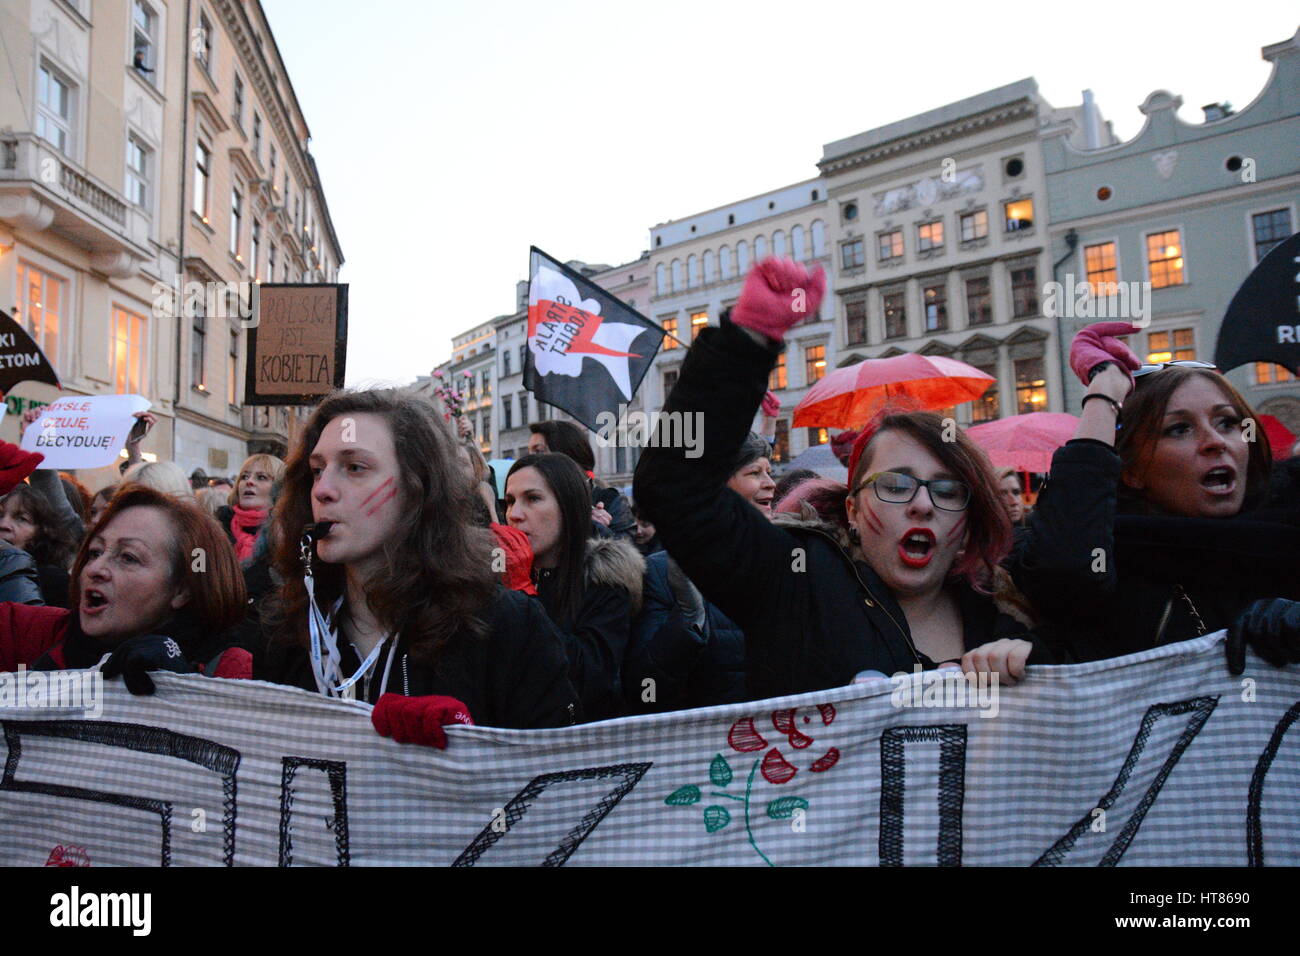 Cracow, Poland. 8th Mar, 2017. International Women's Day rally in Cracow, Poland Credit: Iwona Fijoł/Alamy Live News Stock Photo